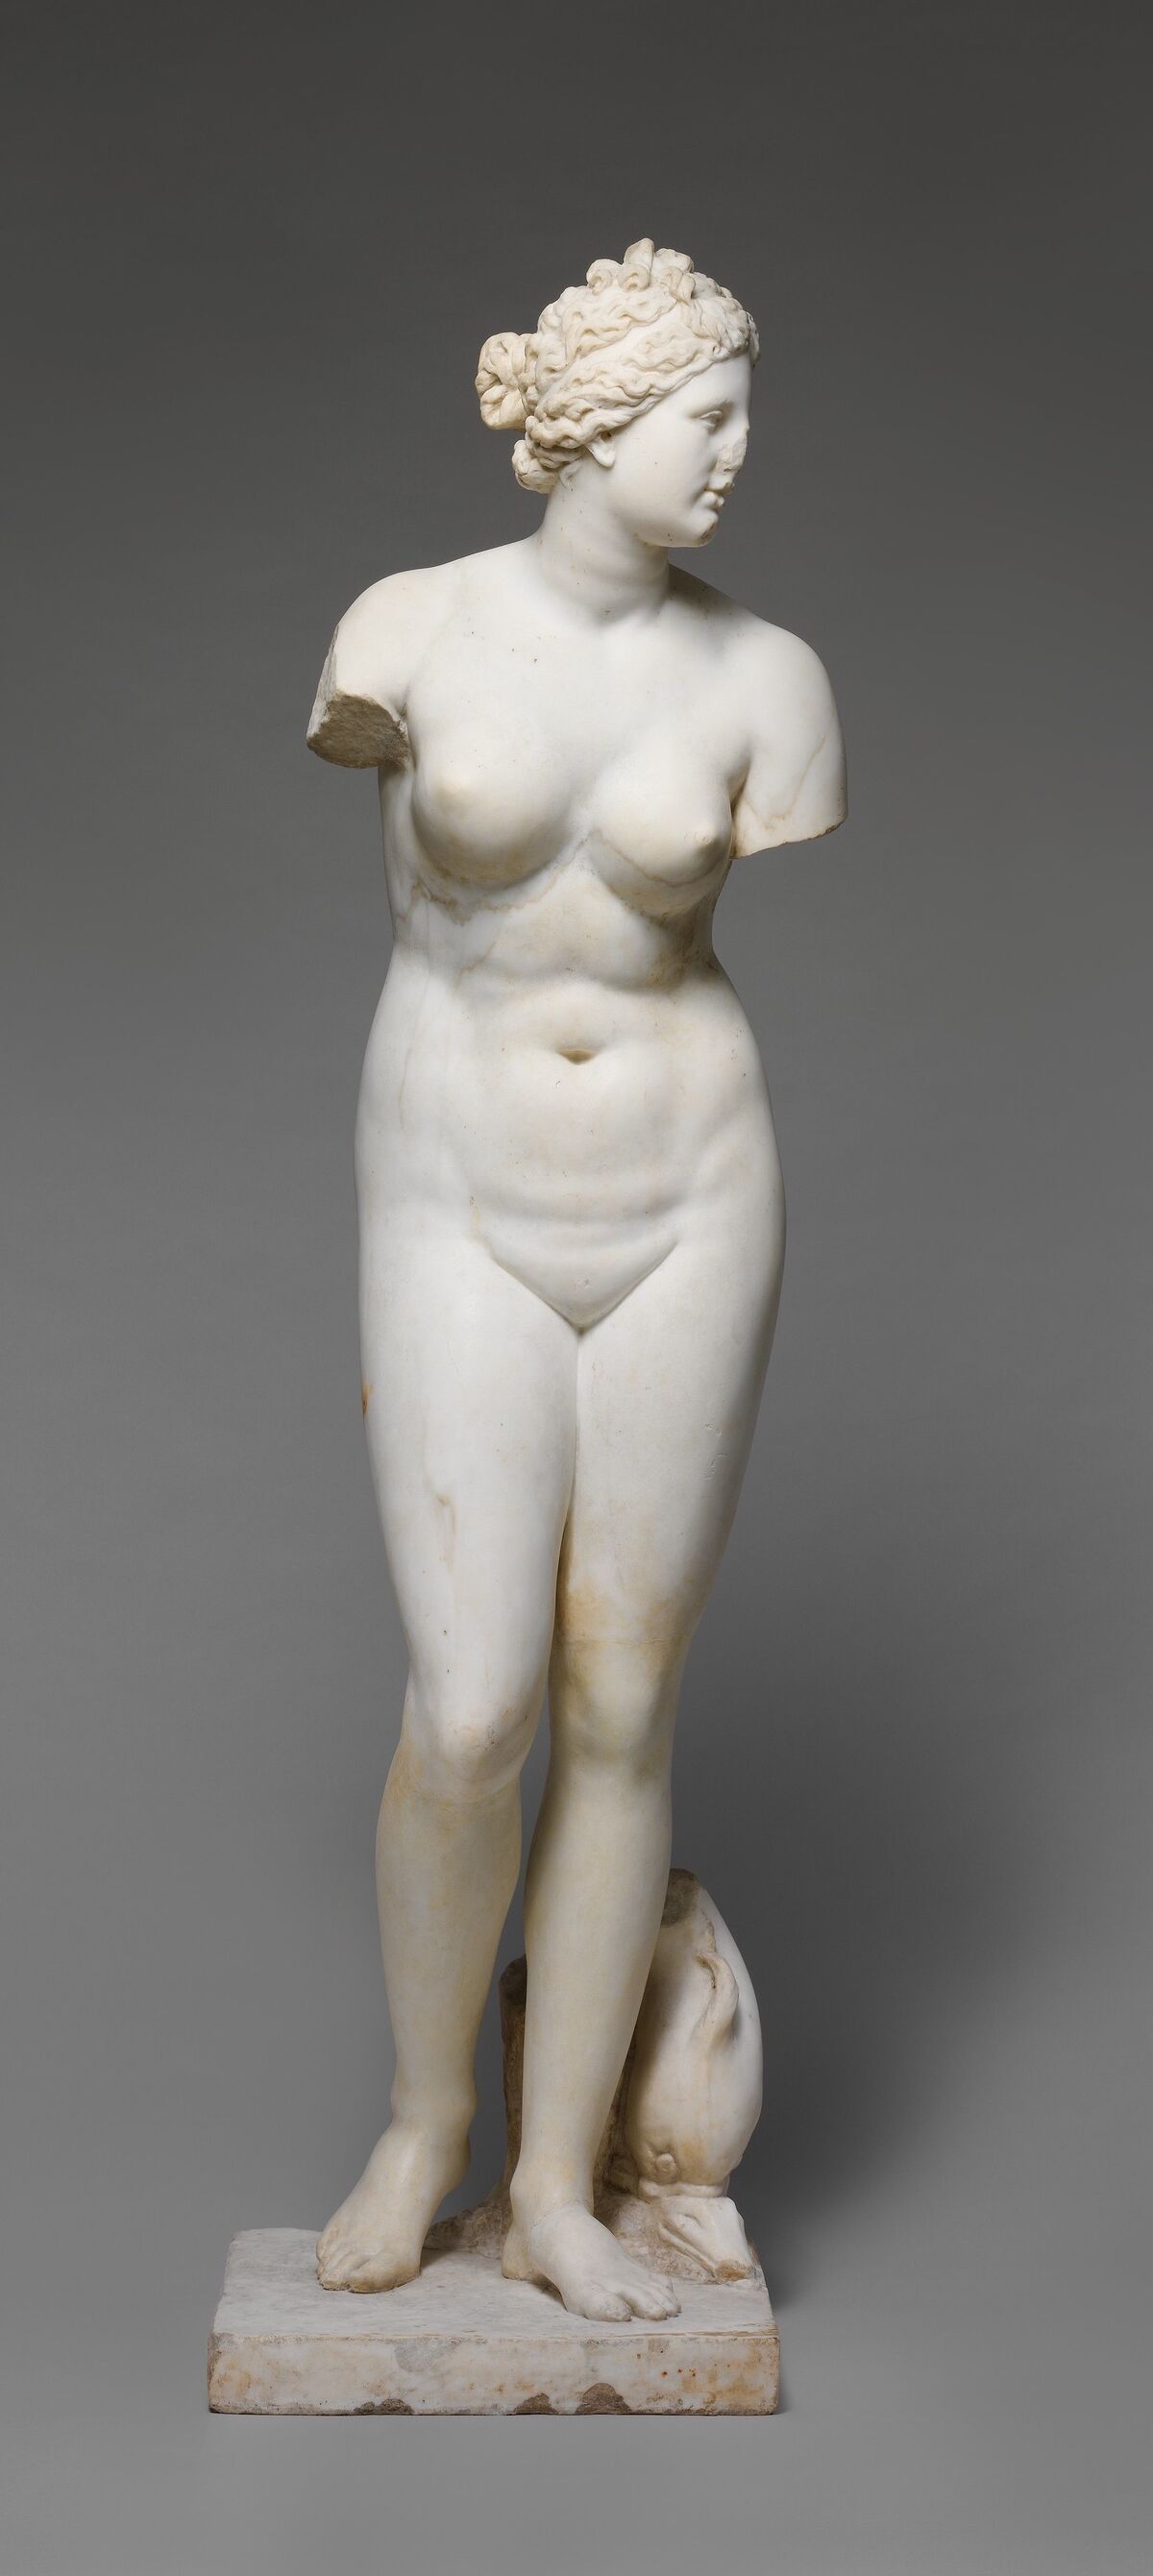 Marble statue of Aphrodite, 1st or 2nd century C.E. Courtesy of the Metropolitan Museum of Art.